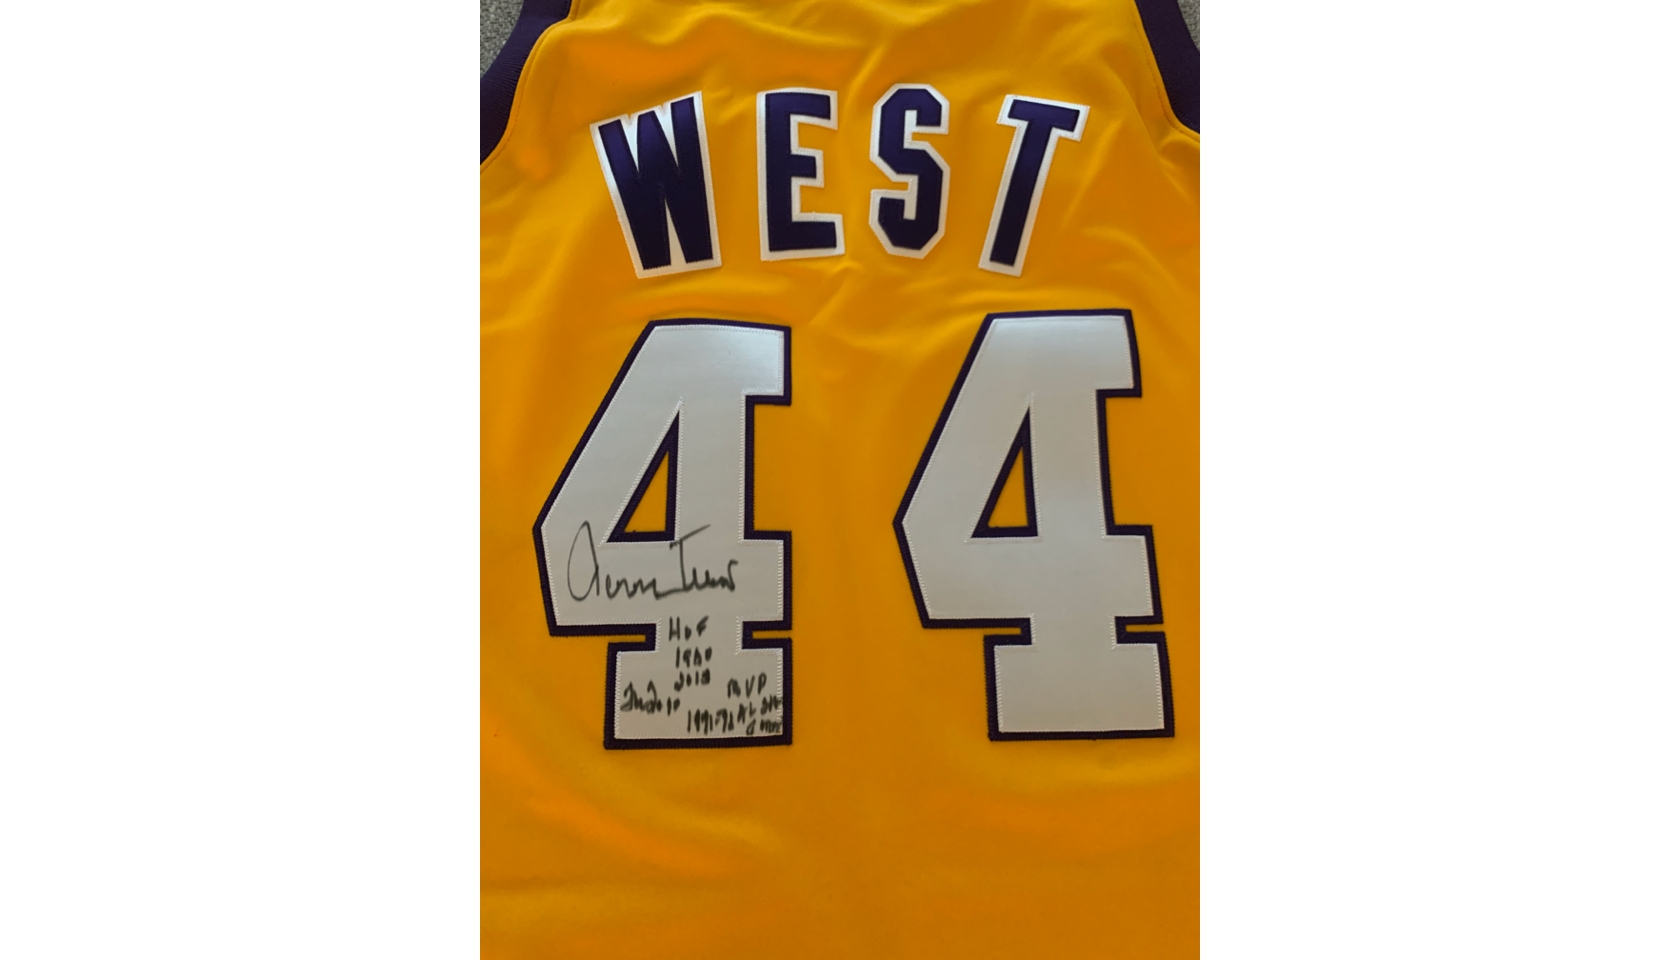 Jerry West Blue/Yellow Minneapolis Lakers Autographed Jersey – Minnesota  Awesome